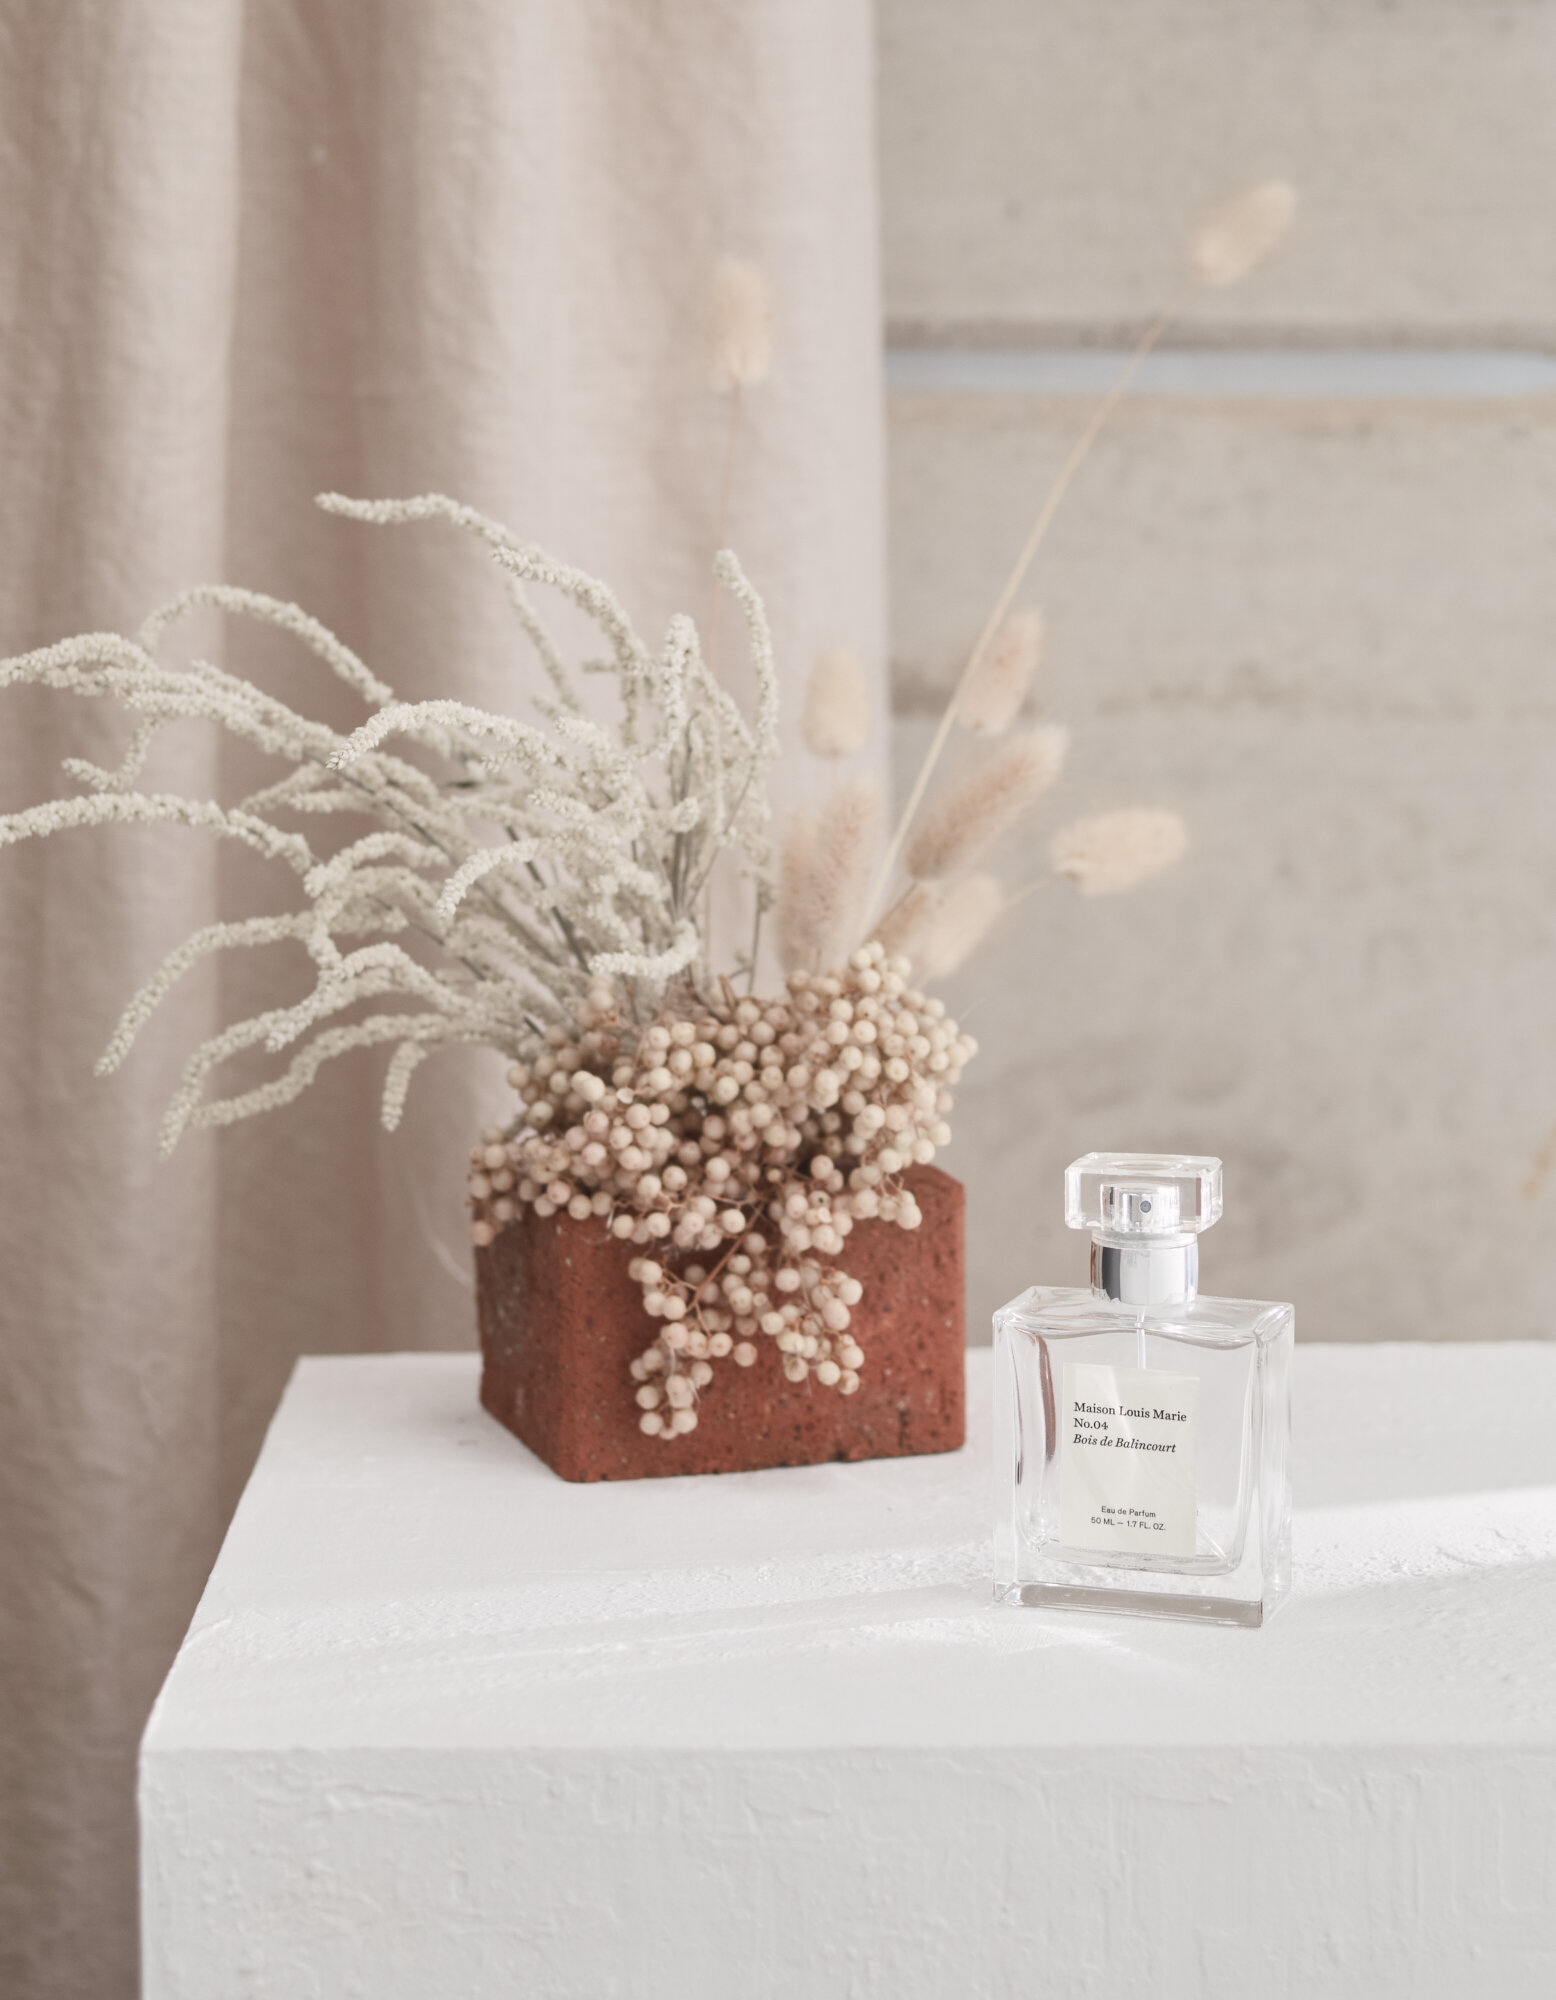   OUR DAILY EDIT PRODUCT PHOTOSHOOT   STYLING BY NINA LILLI HOLDEN  PHOTOGRAPHY BY STEPHANIE MCLEOD  FLOWERS BY LUMEN FLORAL 